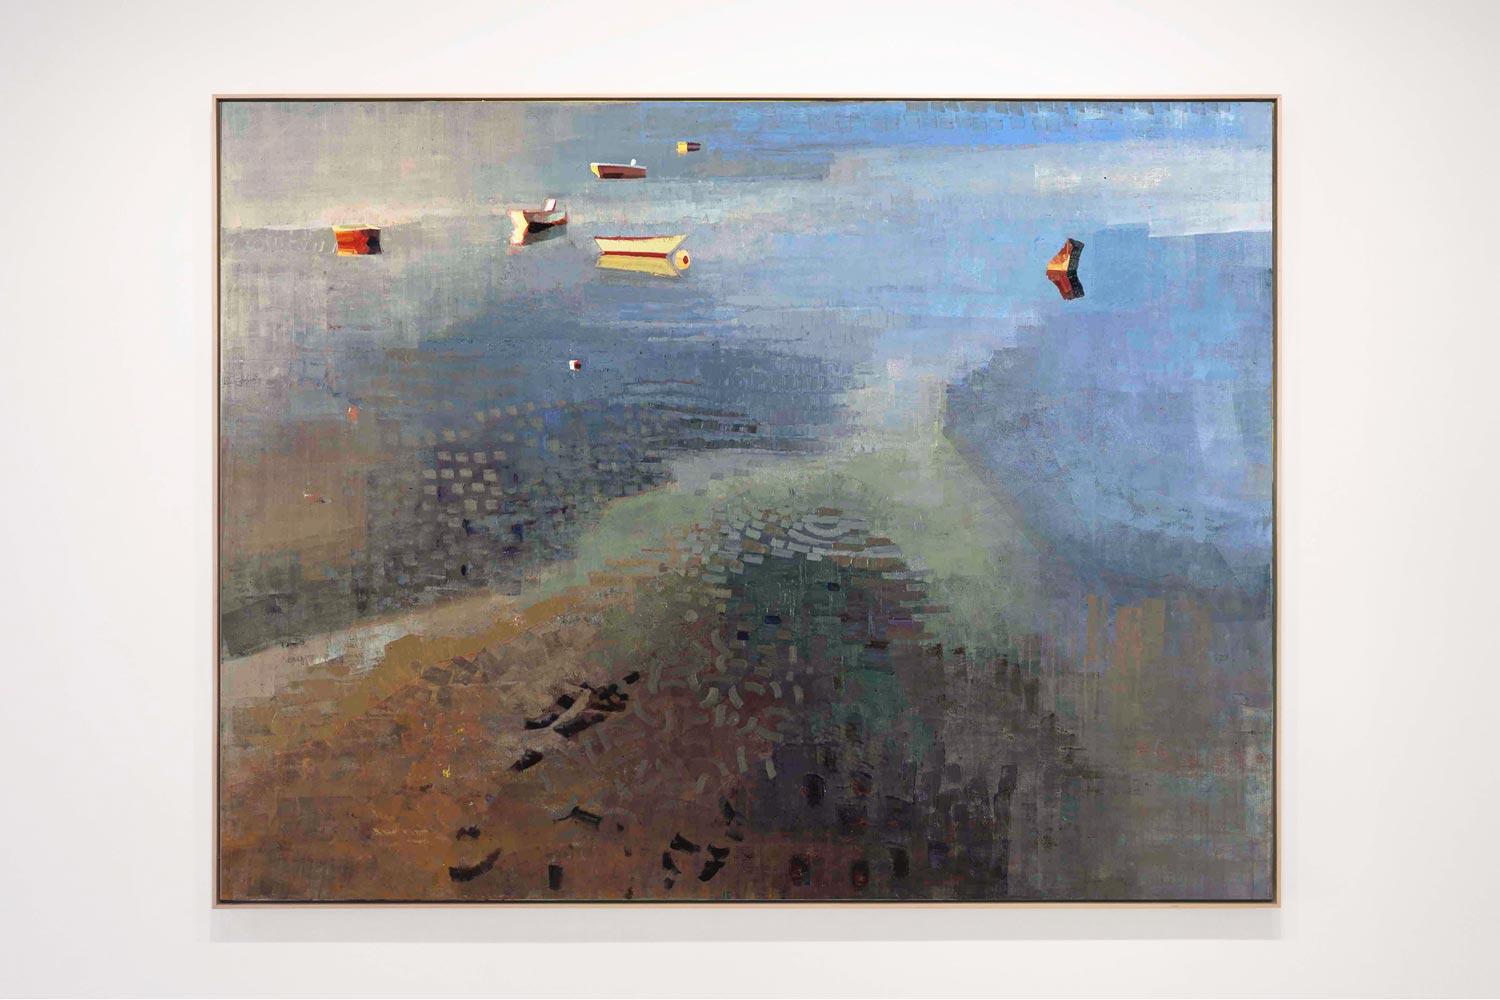 TRANSPARENCY & REFLECTION, Contemporary Landscape, Realism, Water, Boats, Beach - Painting by John Evans